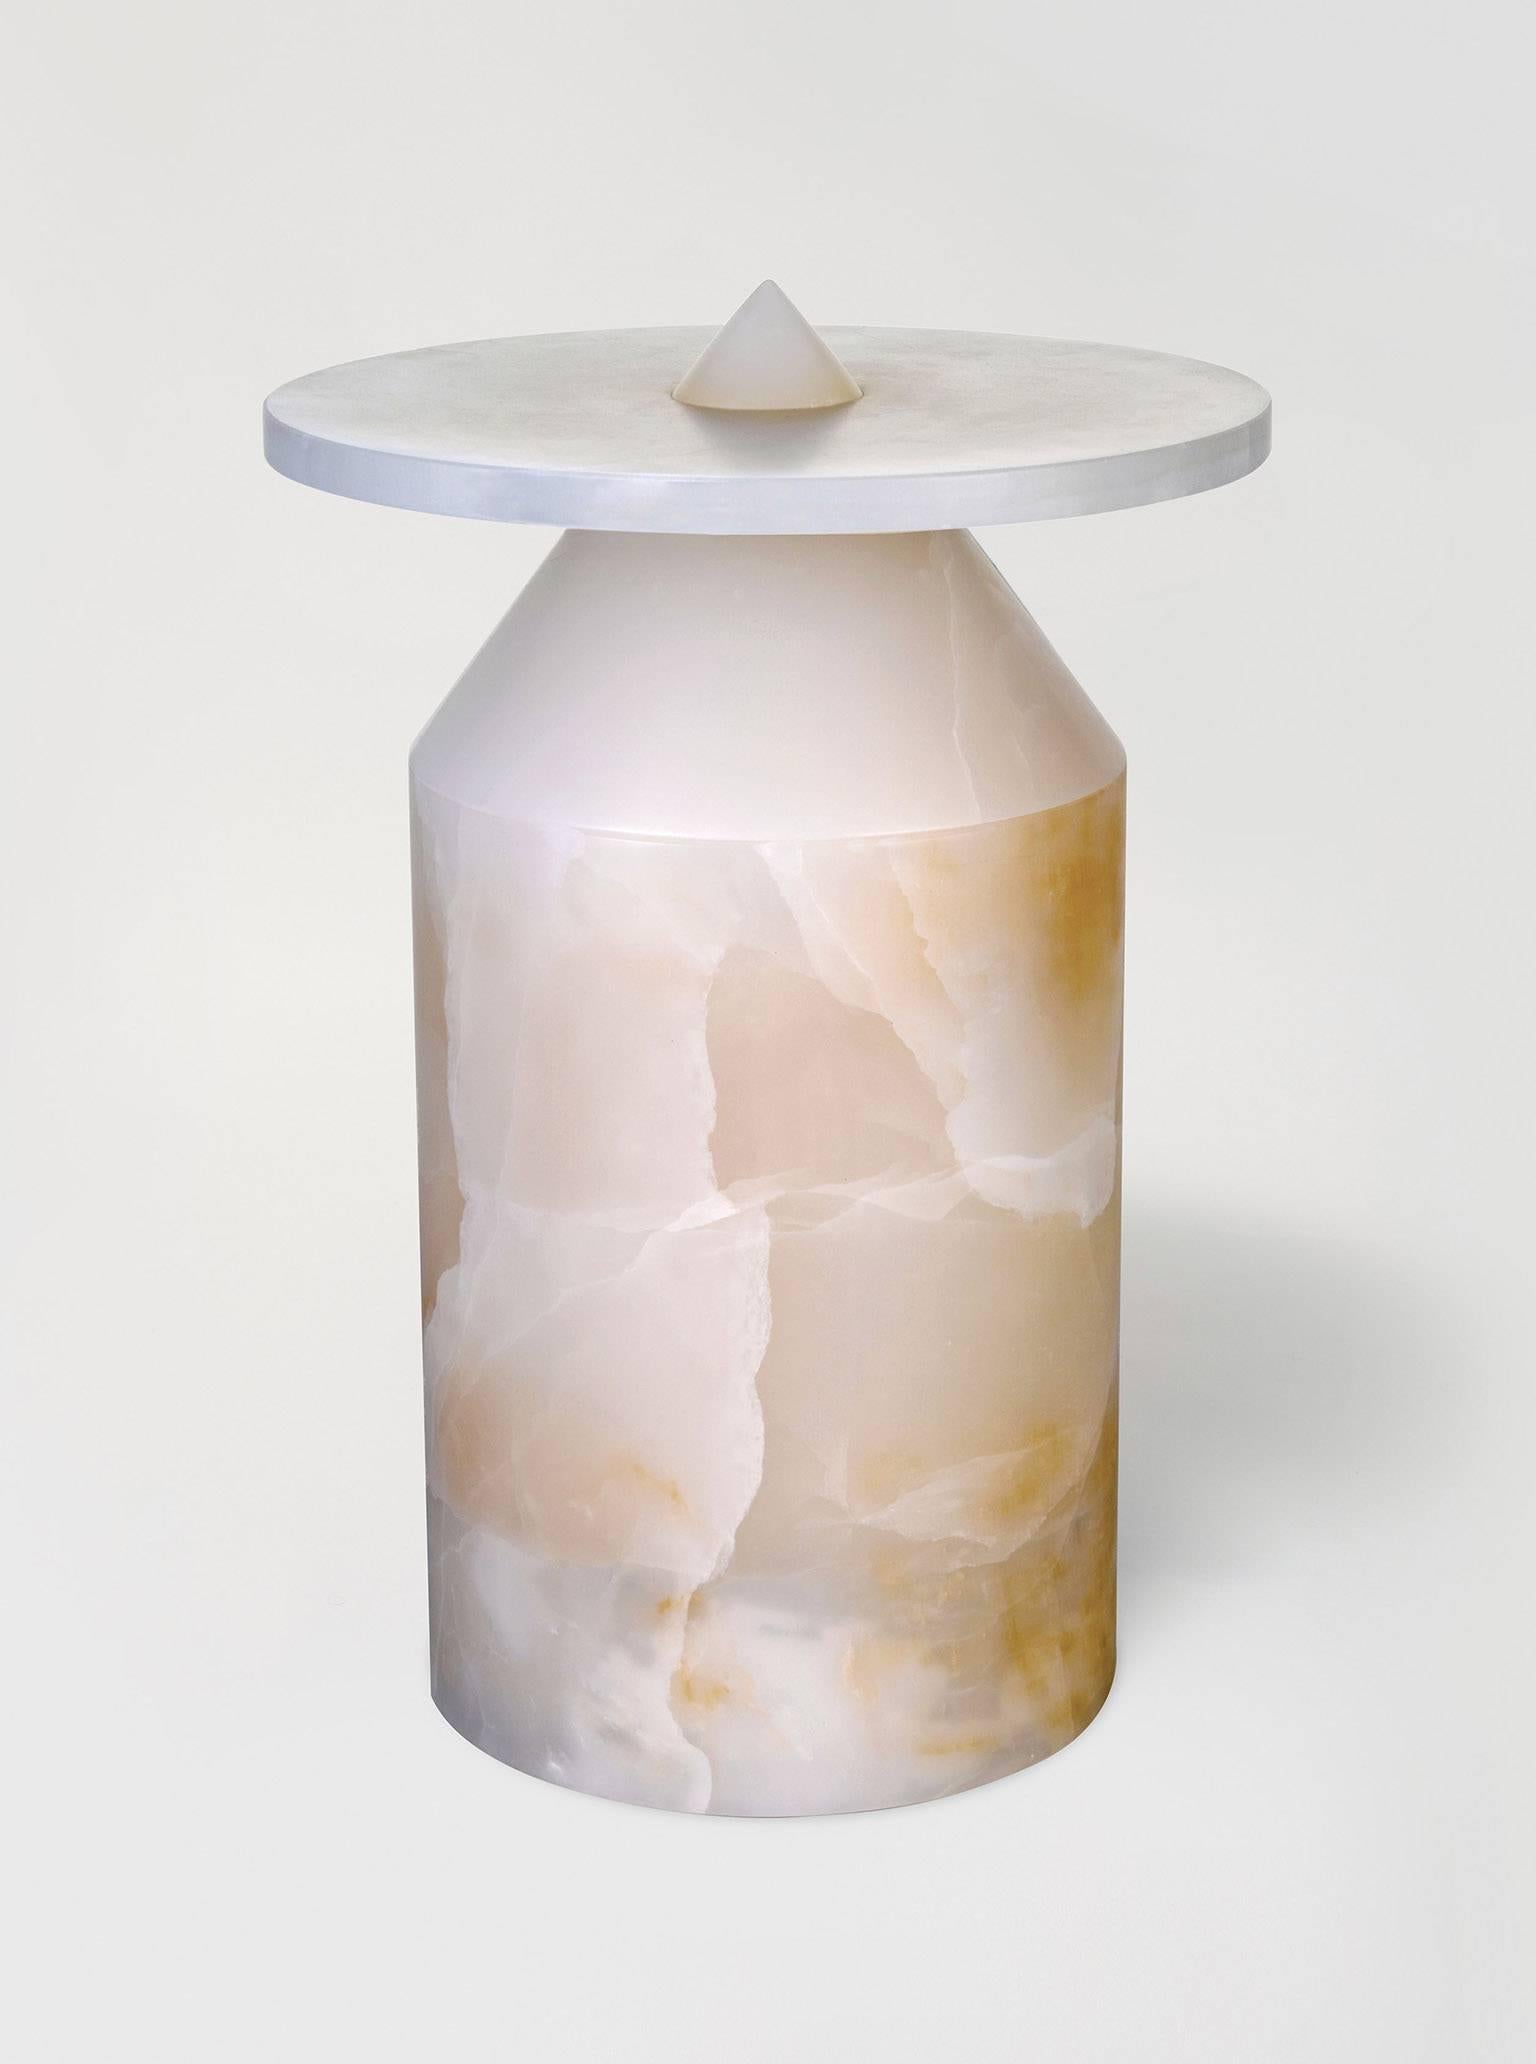 Life force, futuristic dynamism, ancestral power. With a cylindrical base and an interchangeable tip aimed at the ground or the sky, Karen Chekerdjian’s creation never belies its marble support.
TOTEM is unique and trine, the divine inspiration of a